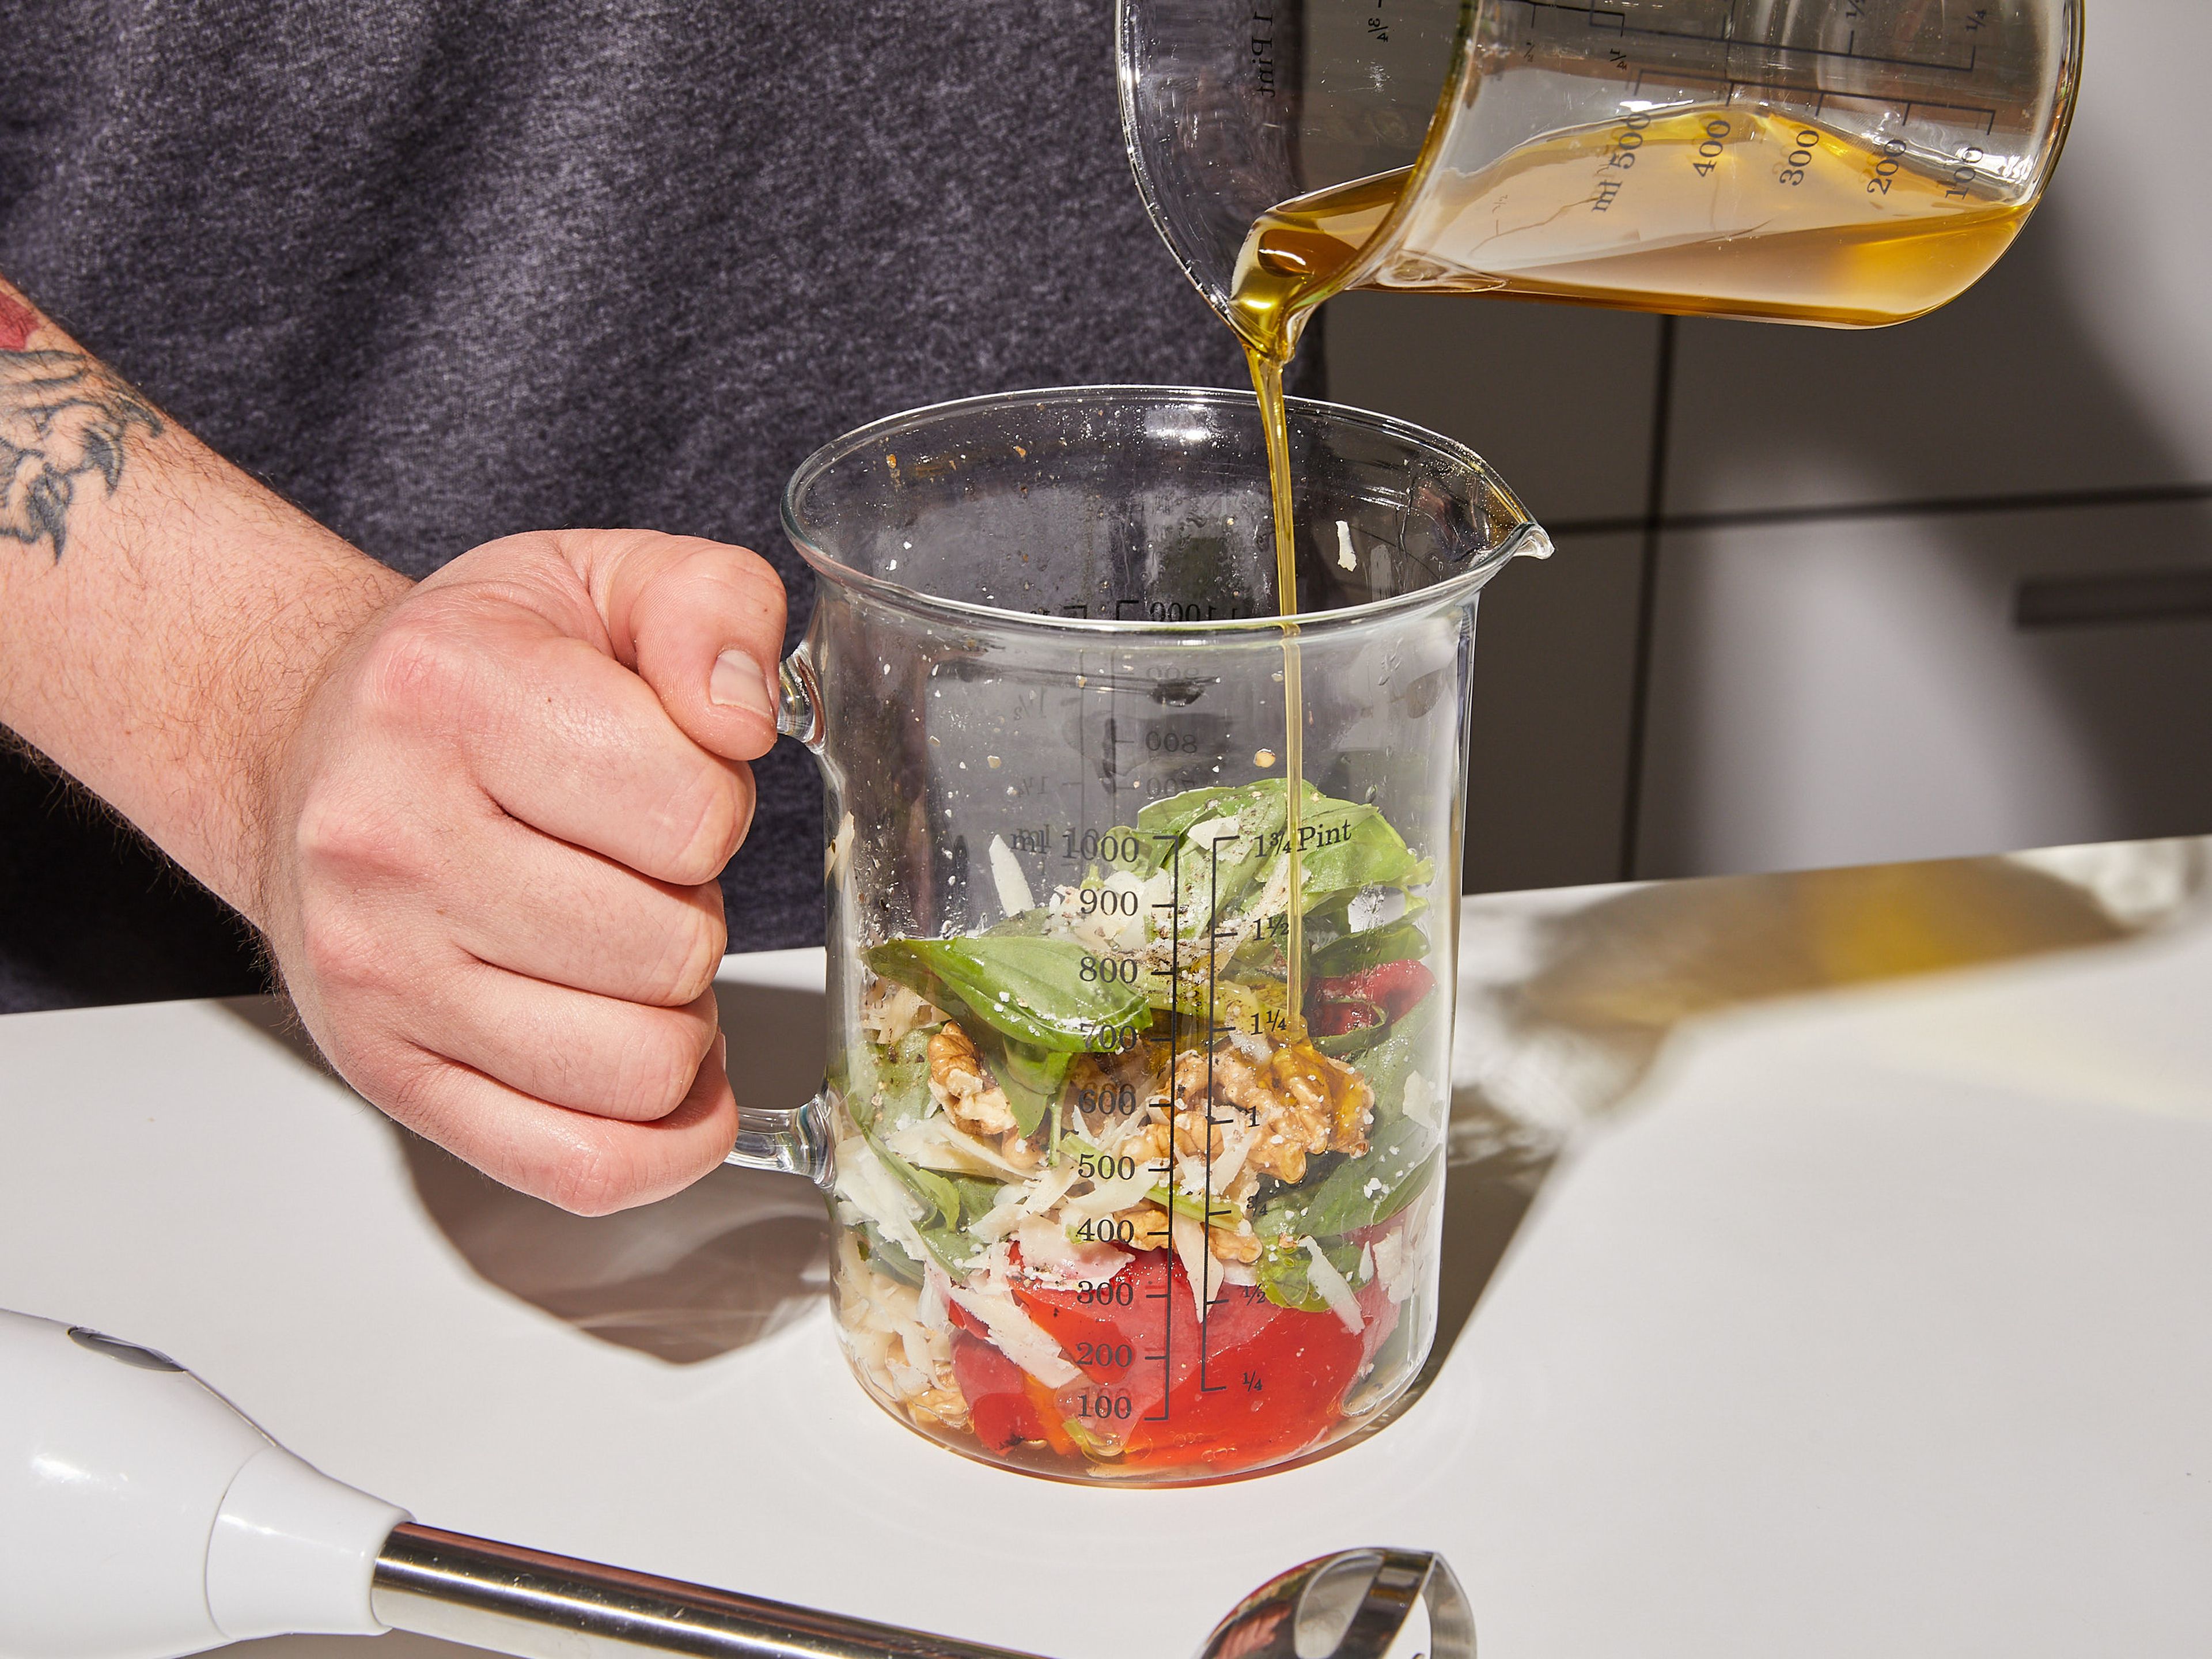 Add all ingredients to a large measuring cup,  use an immersion blender to blend until very smooth and saucy. Add lemon juice to taste, and season with salt and pepper.